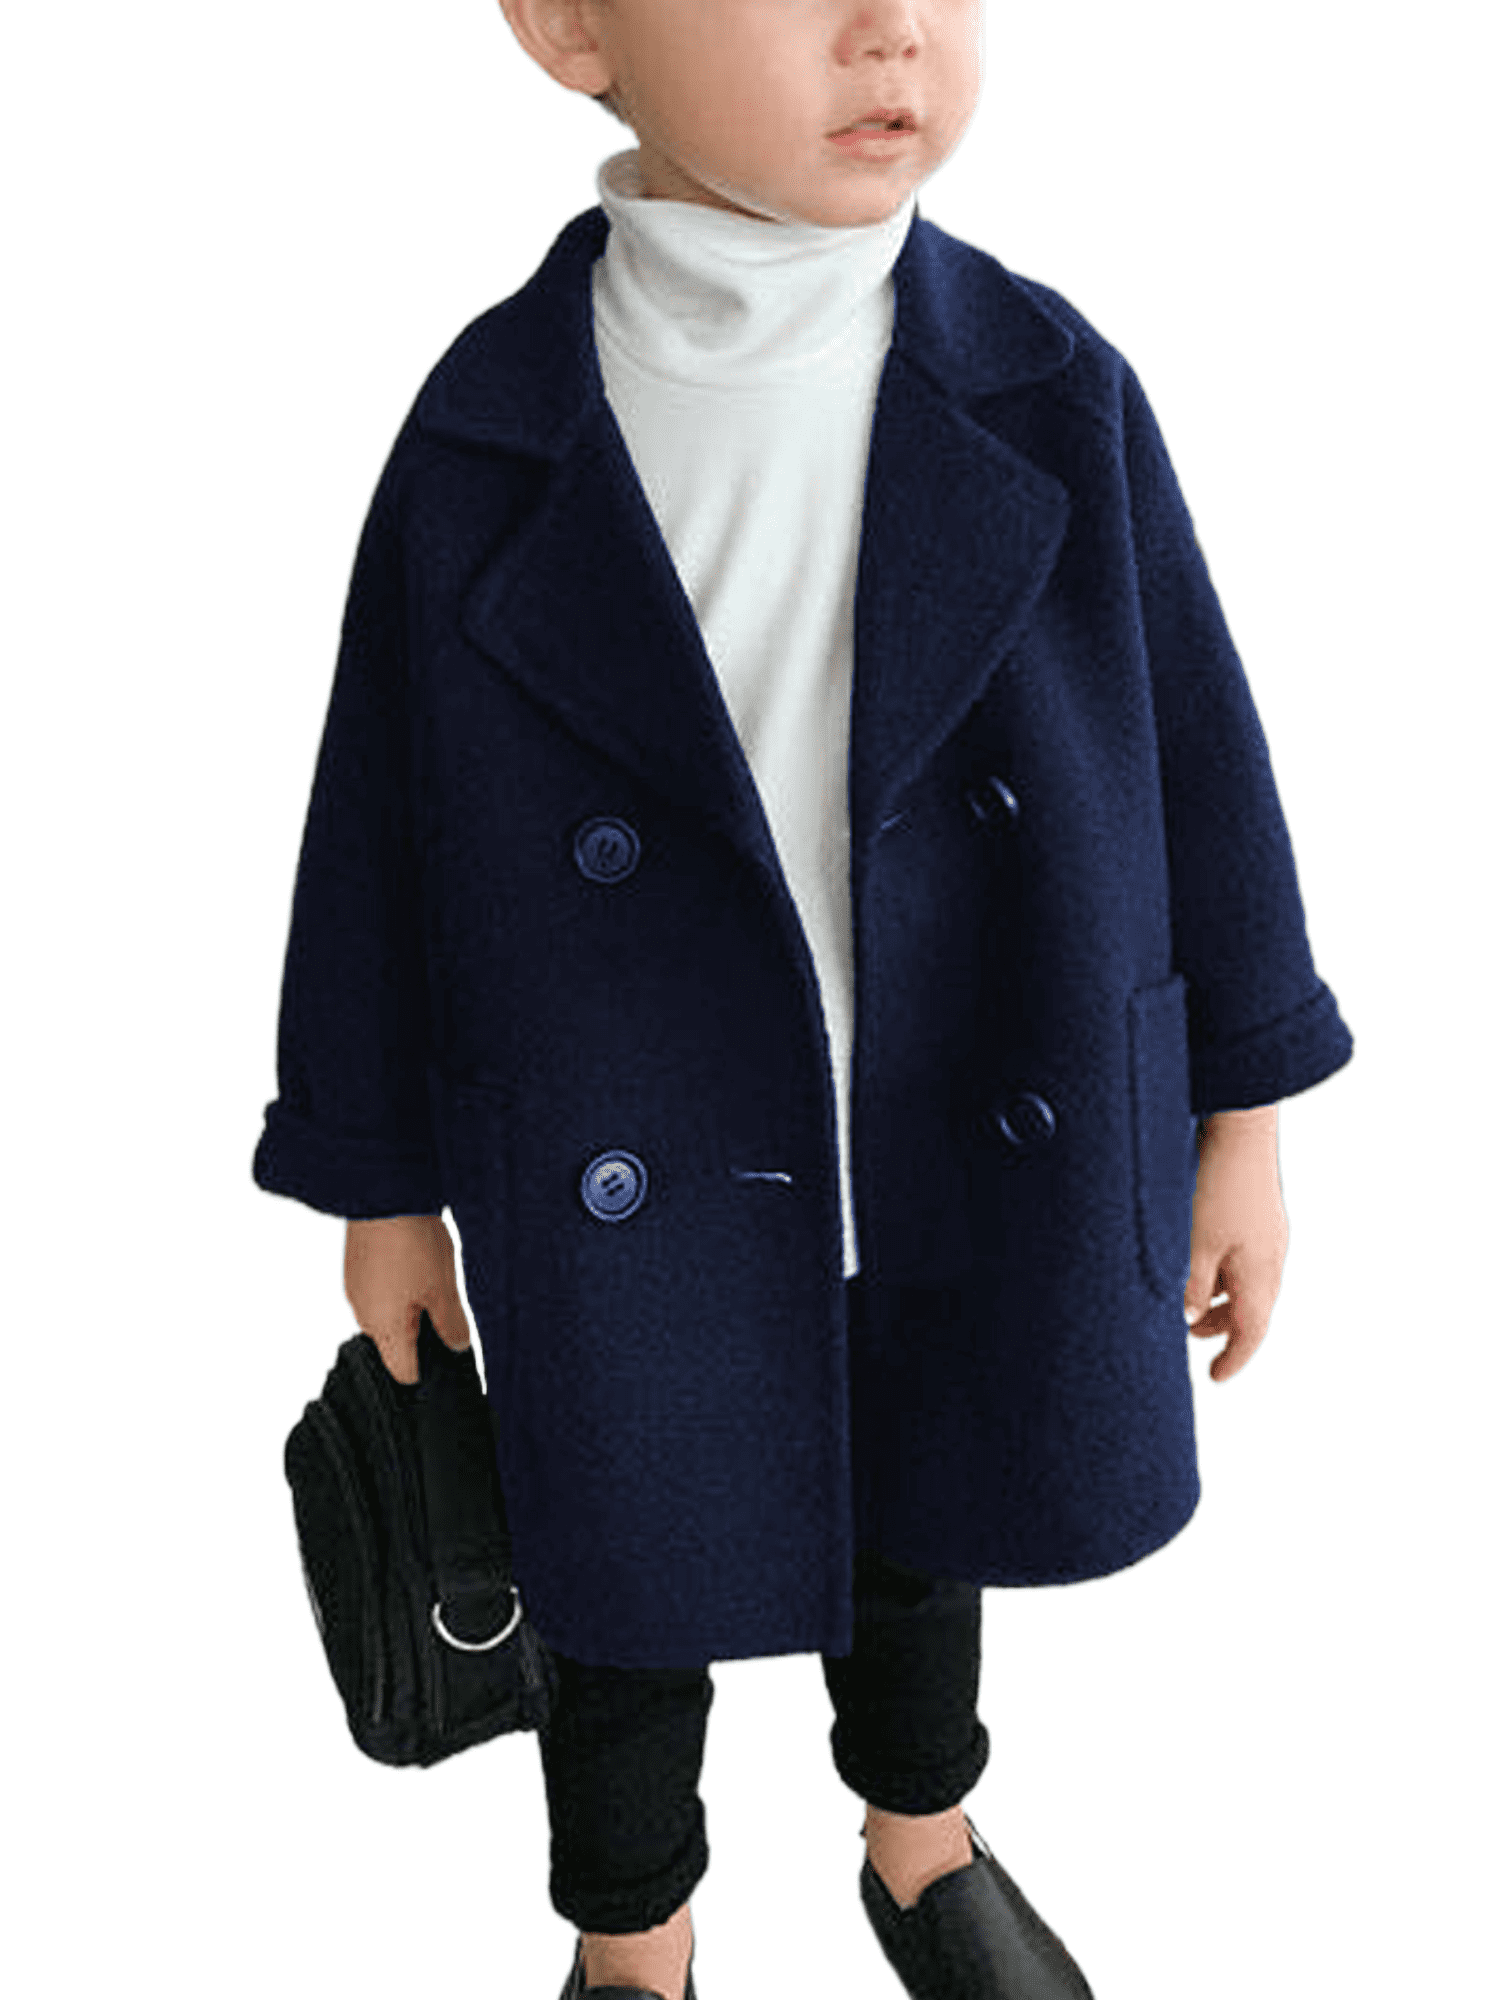 Kids Girls Baby Coat Thick Wool Blend Jacket Parka Warm Winter Button Outercoat 